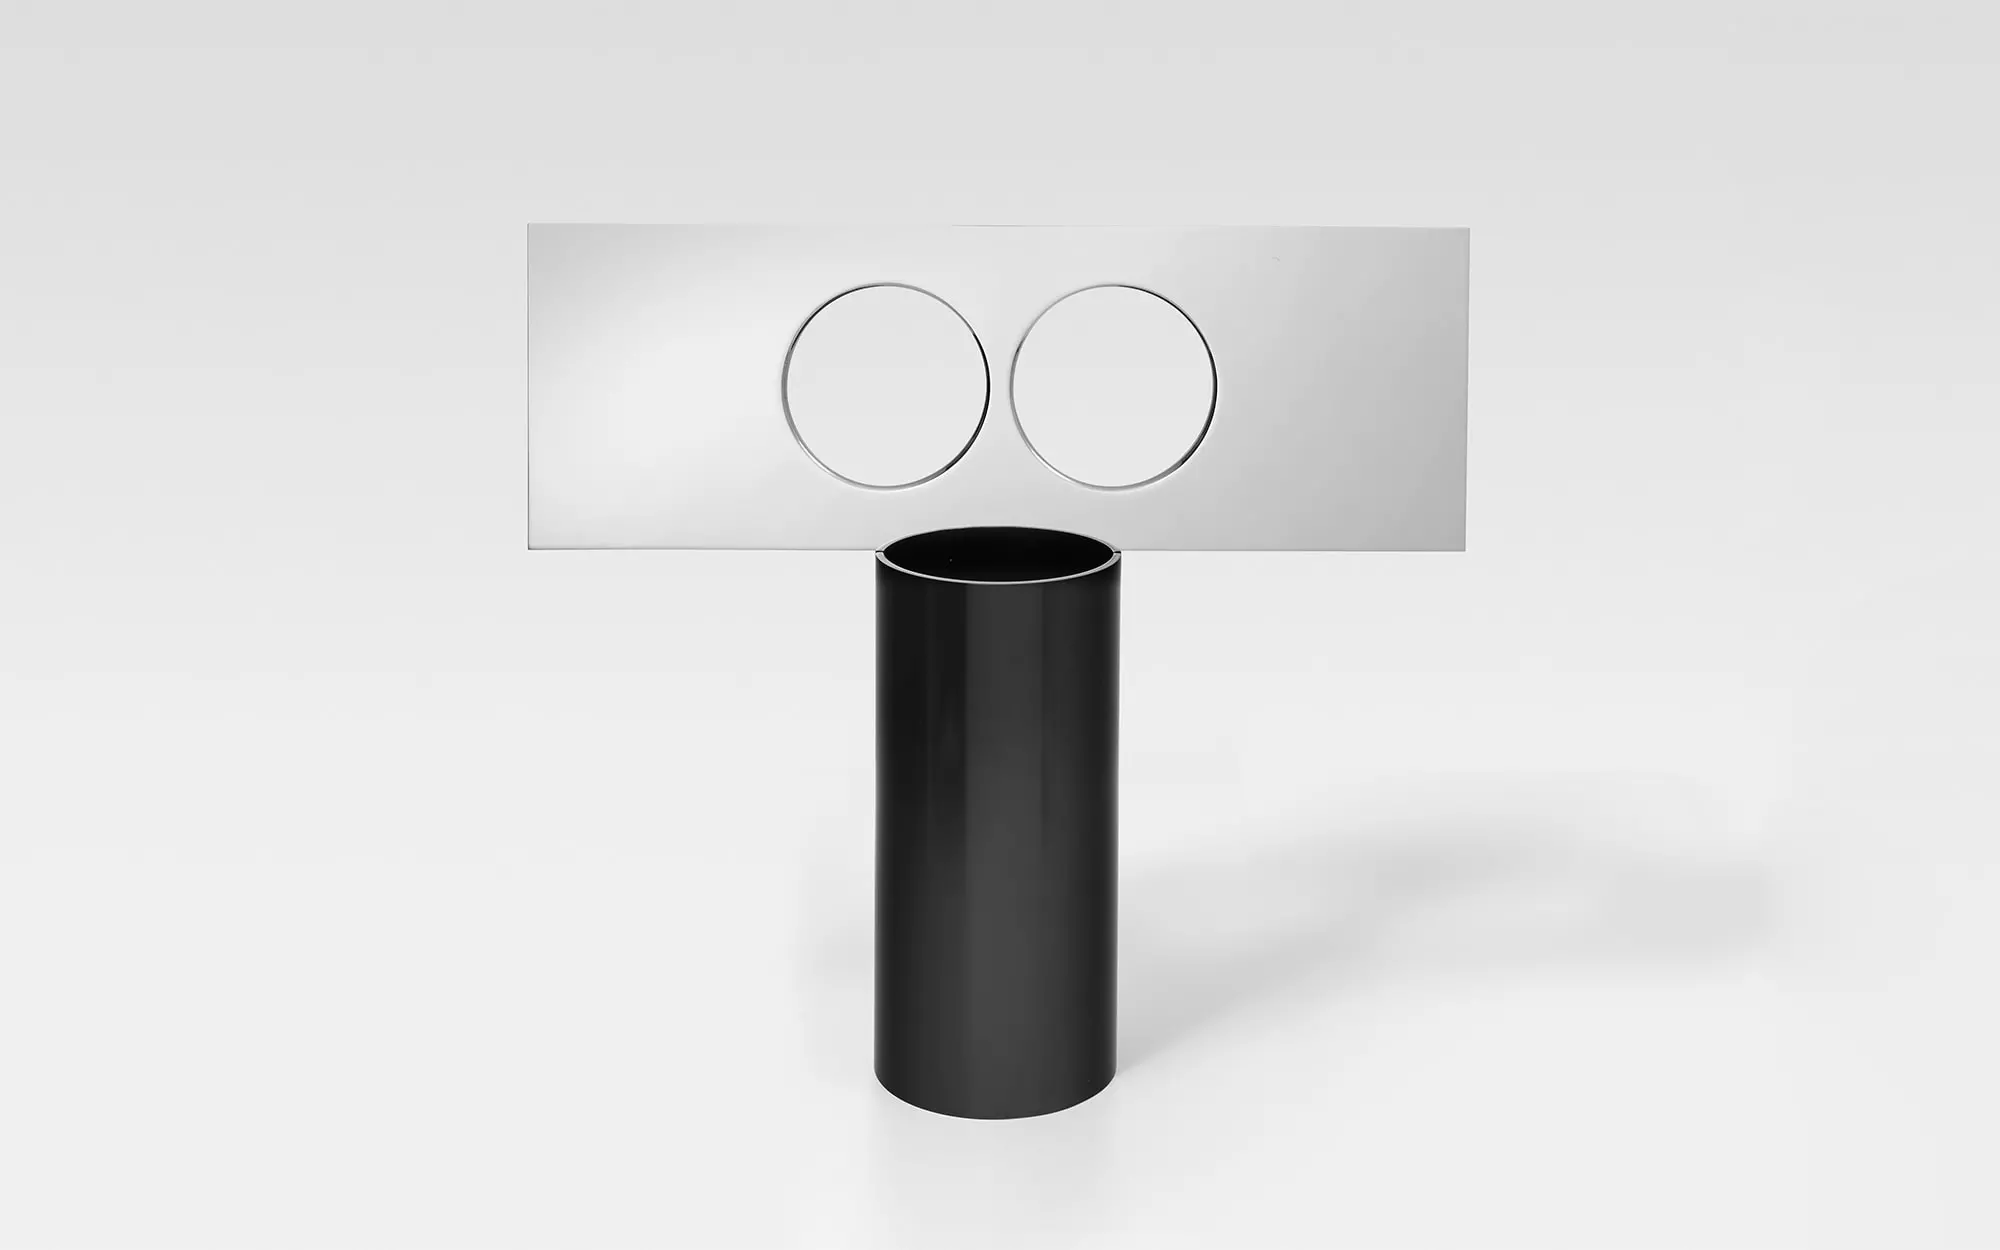 Lunettes - 2 Vase - Pierre Charpin - Coffee table - Galerie kreo